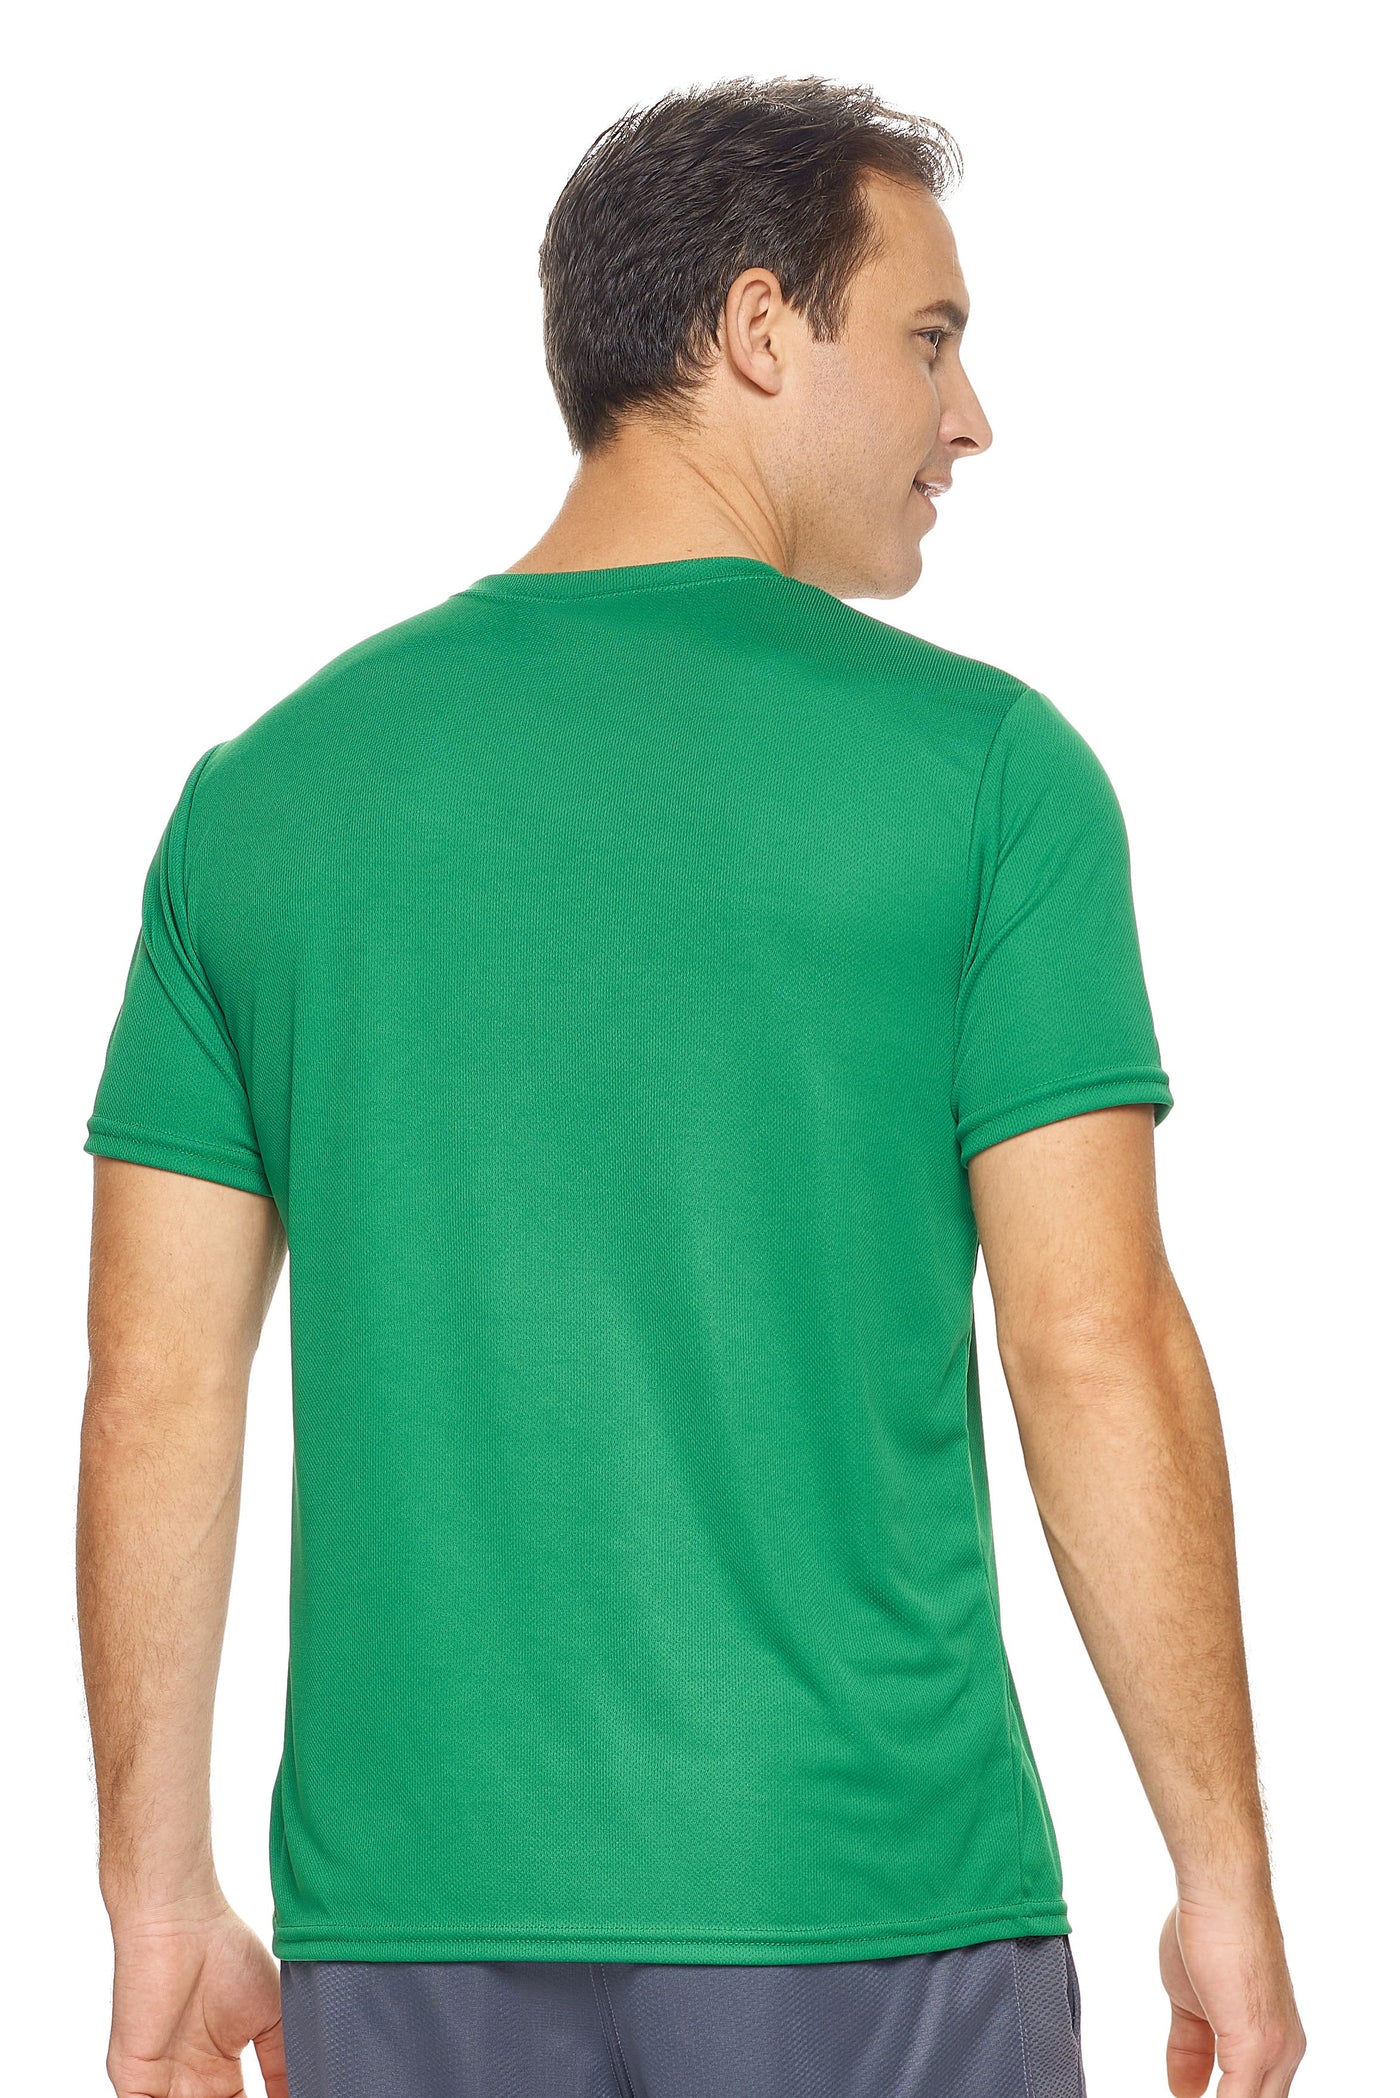 Expert Brand Retail Sportswear Made in USA Men's Oxymesh™ Crewneck Tec Tee kelly green 3#color_kelly-green